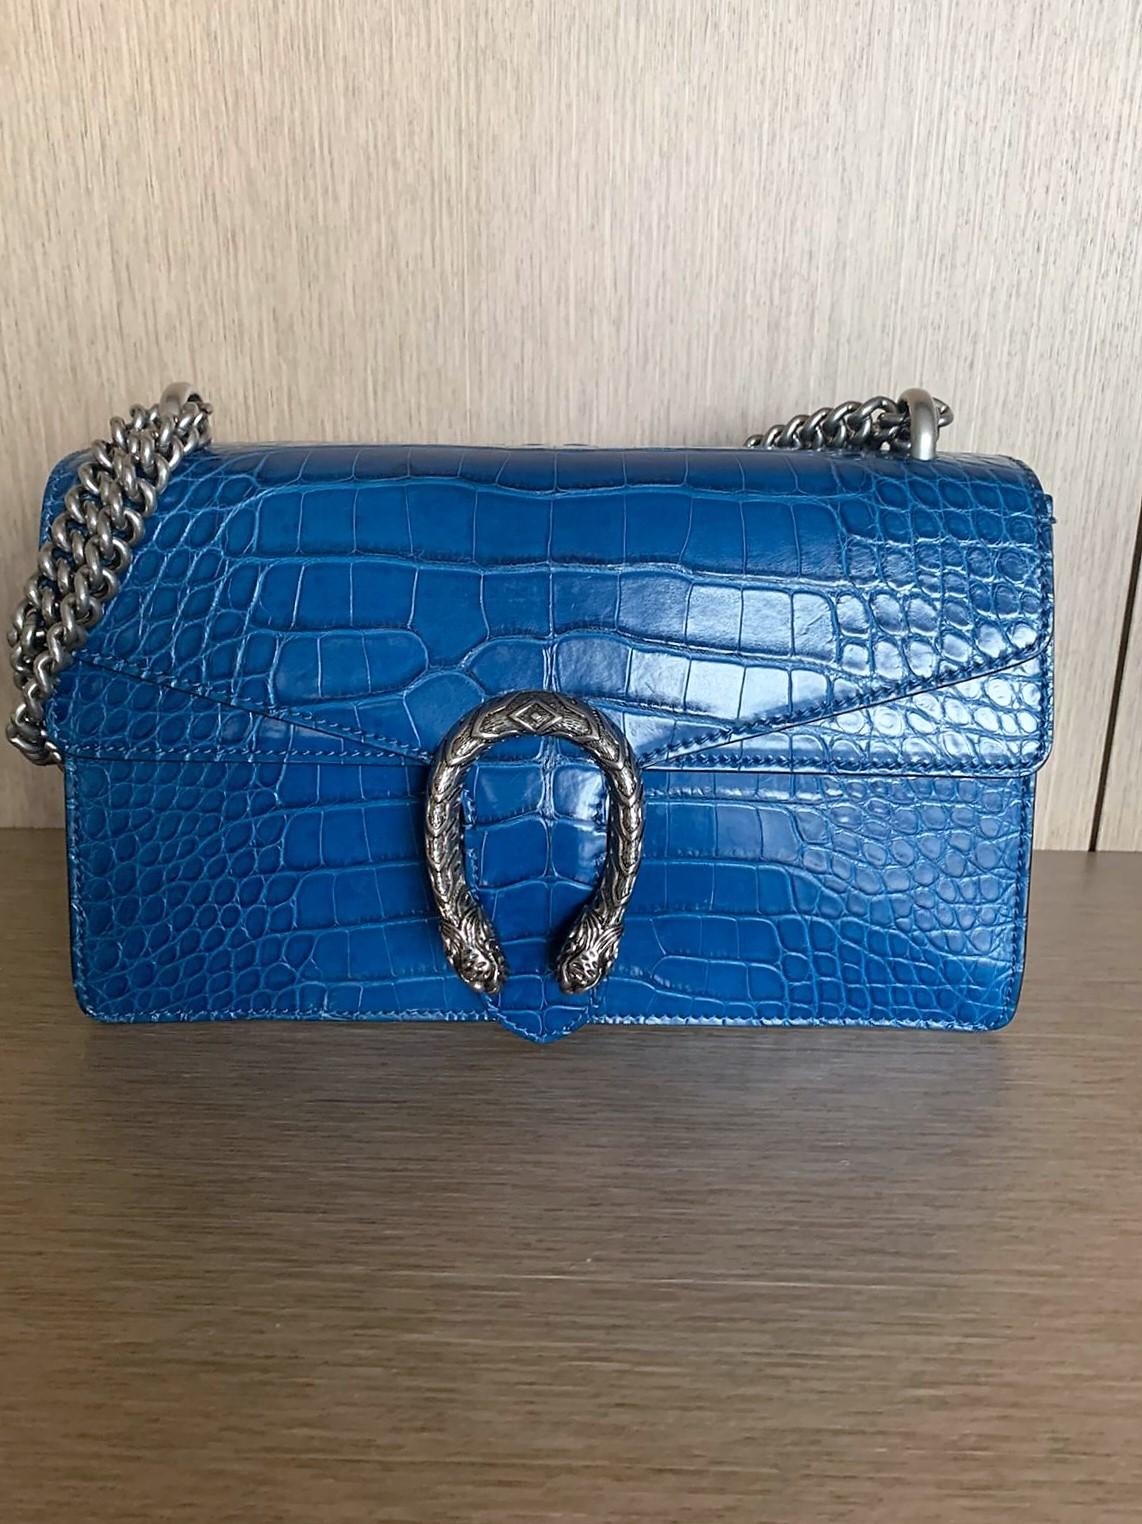 Amazing and super rare Gucci crocodile bag
Model Dyonisus, year 2016
Color Agata Blue
Real crocodile
Palladium tone hardware
Tiger head pin closure with side release
Hand painted borders
Sliding chain strap, can be worned as shoulder strap or as top